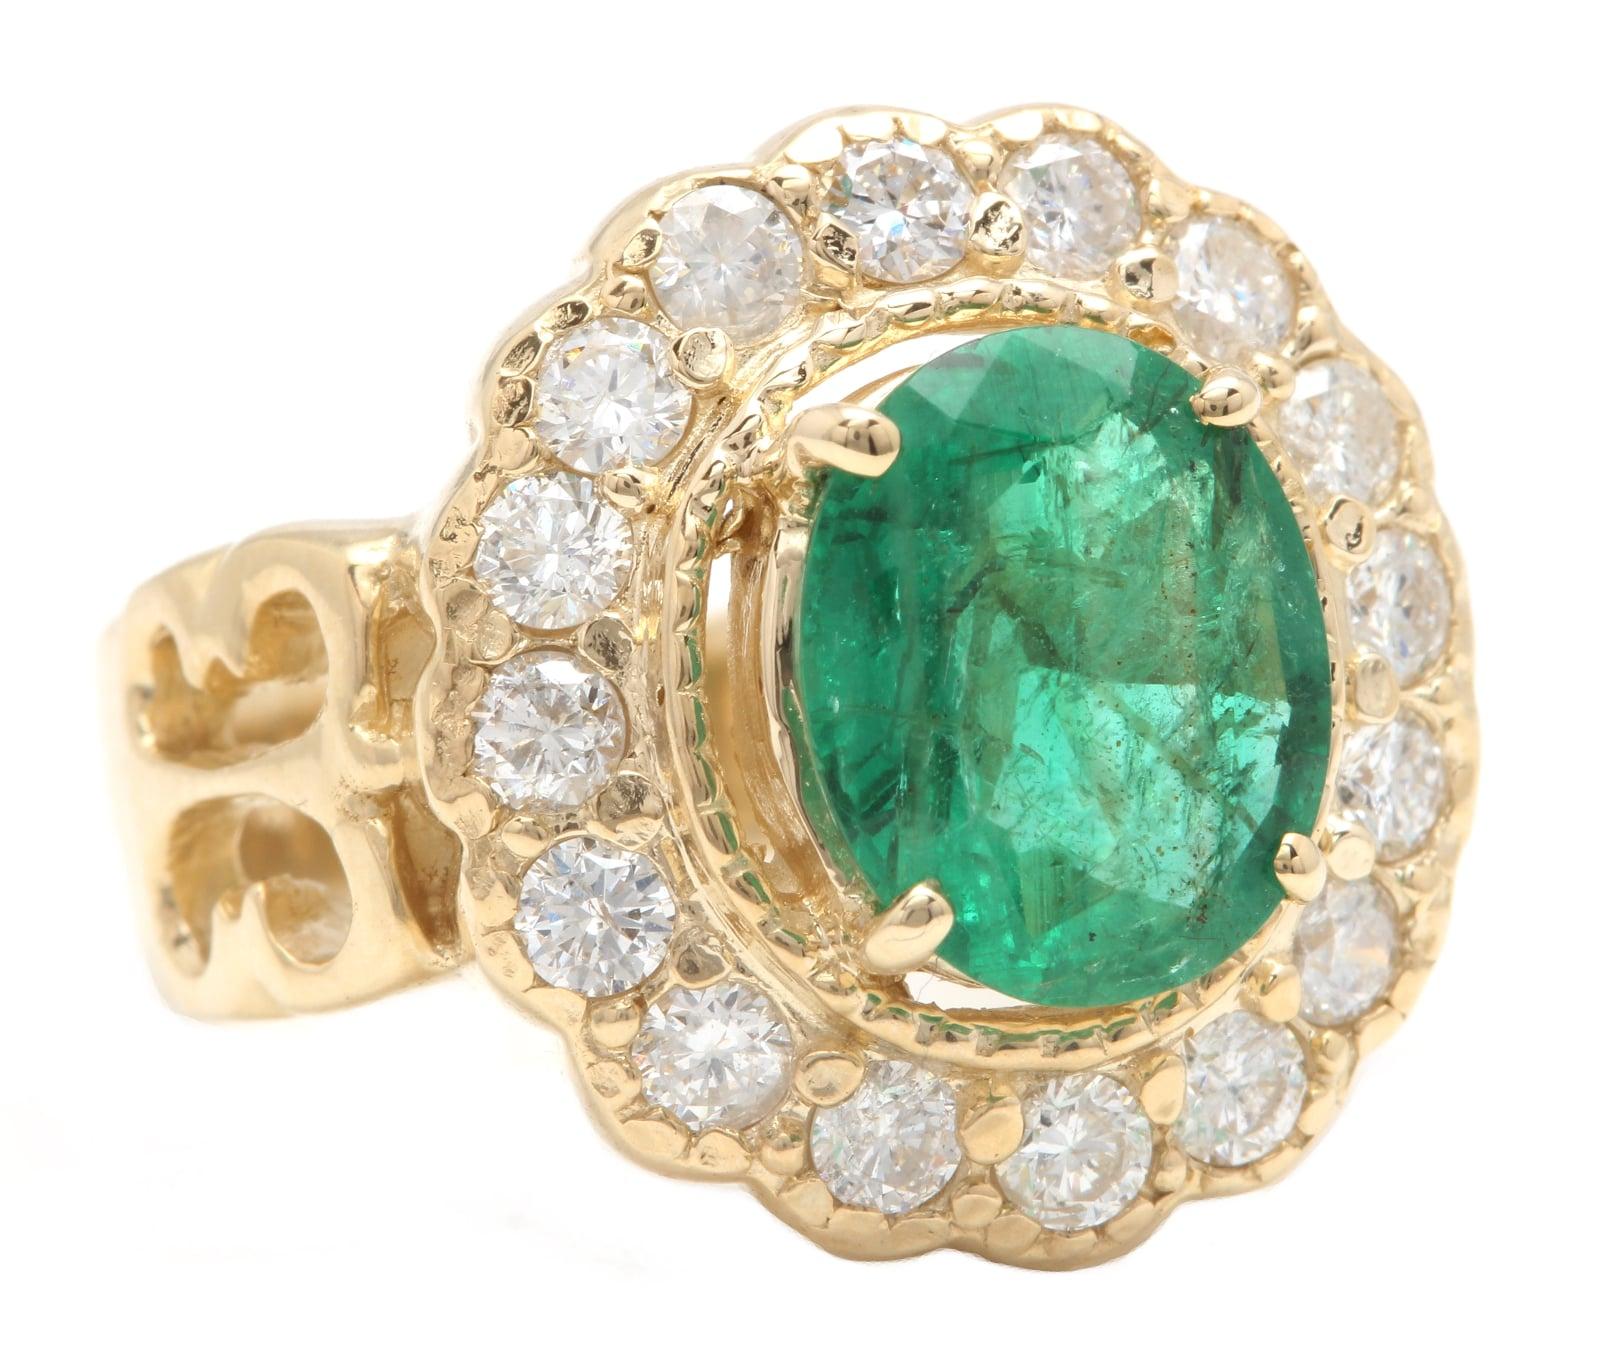 4.90 Carats Natural Emerald and Diamond 14K Solid Yellow Gold Ring

Suggested Replacement Value:  Approx. $8,000.00

Total Natural Cushion Cut Emerald Weight is: Approx. 3.50 Carats (Transparent)

Emerald Measures: Approx.  11.00 x 9.00mm

Emerald